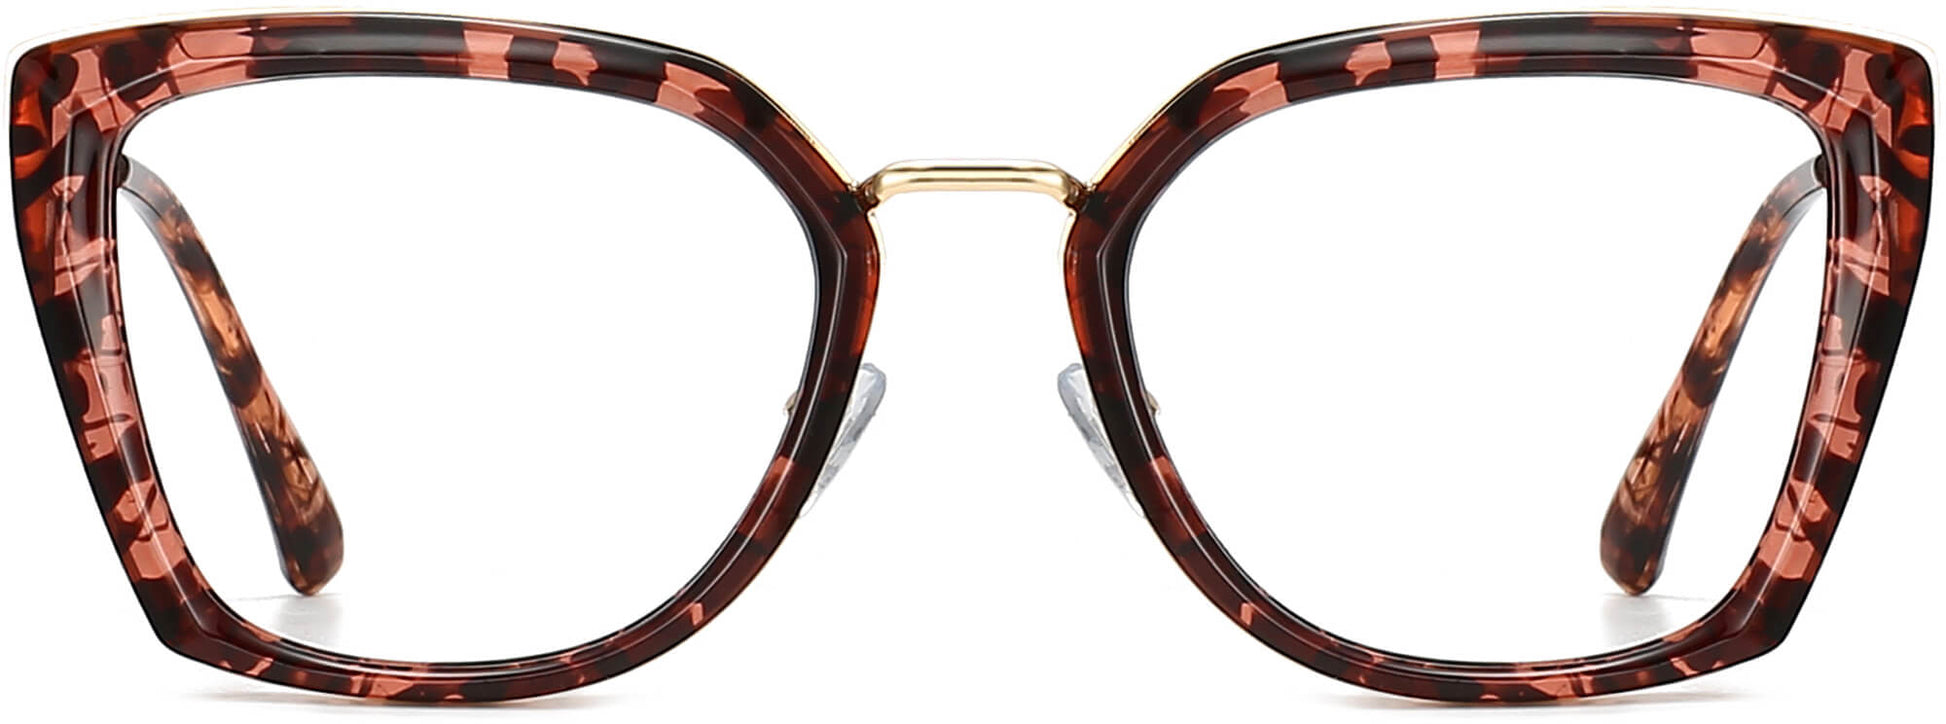 Cameron Cateye Tortoise Eyeglasses from ANRRI, front view